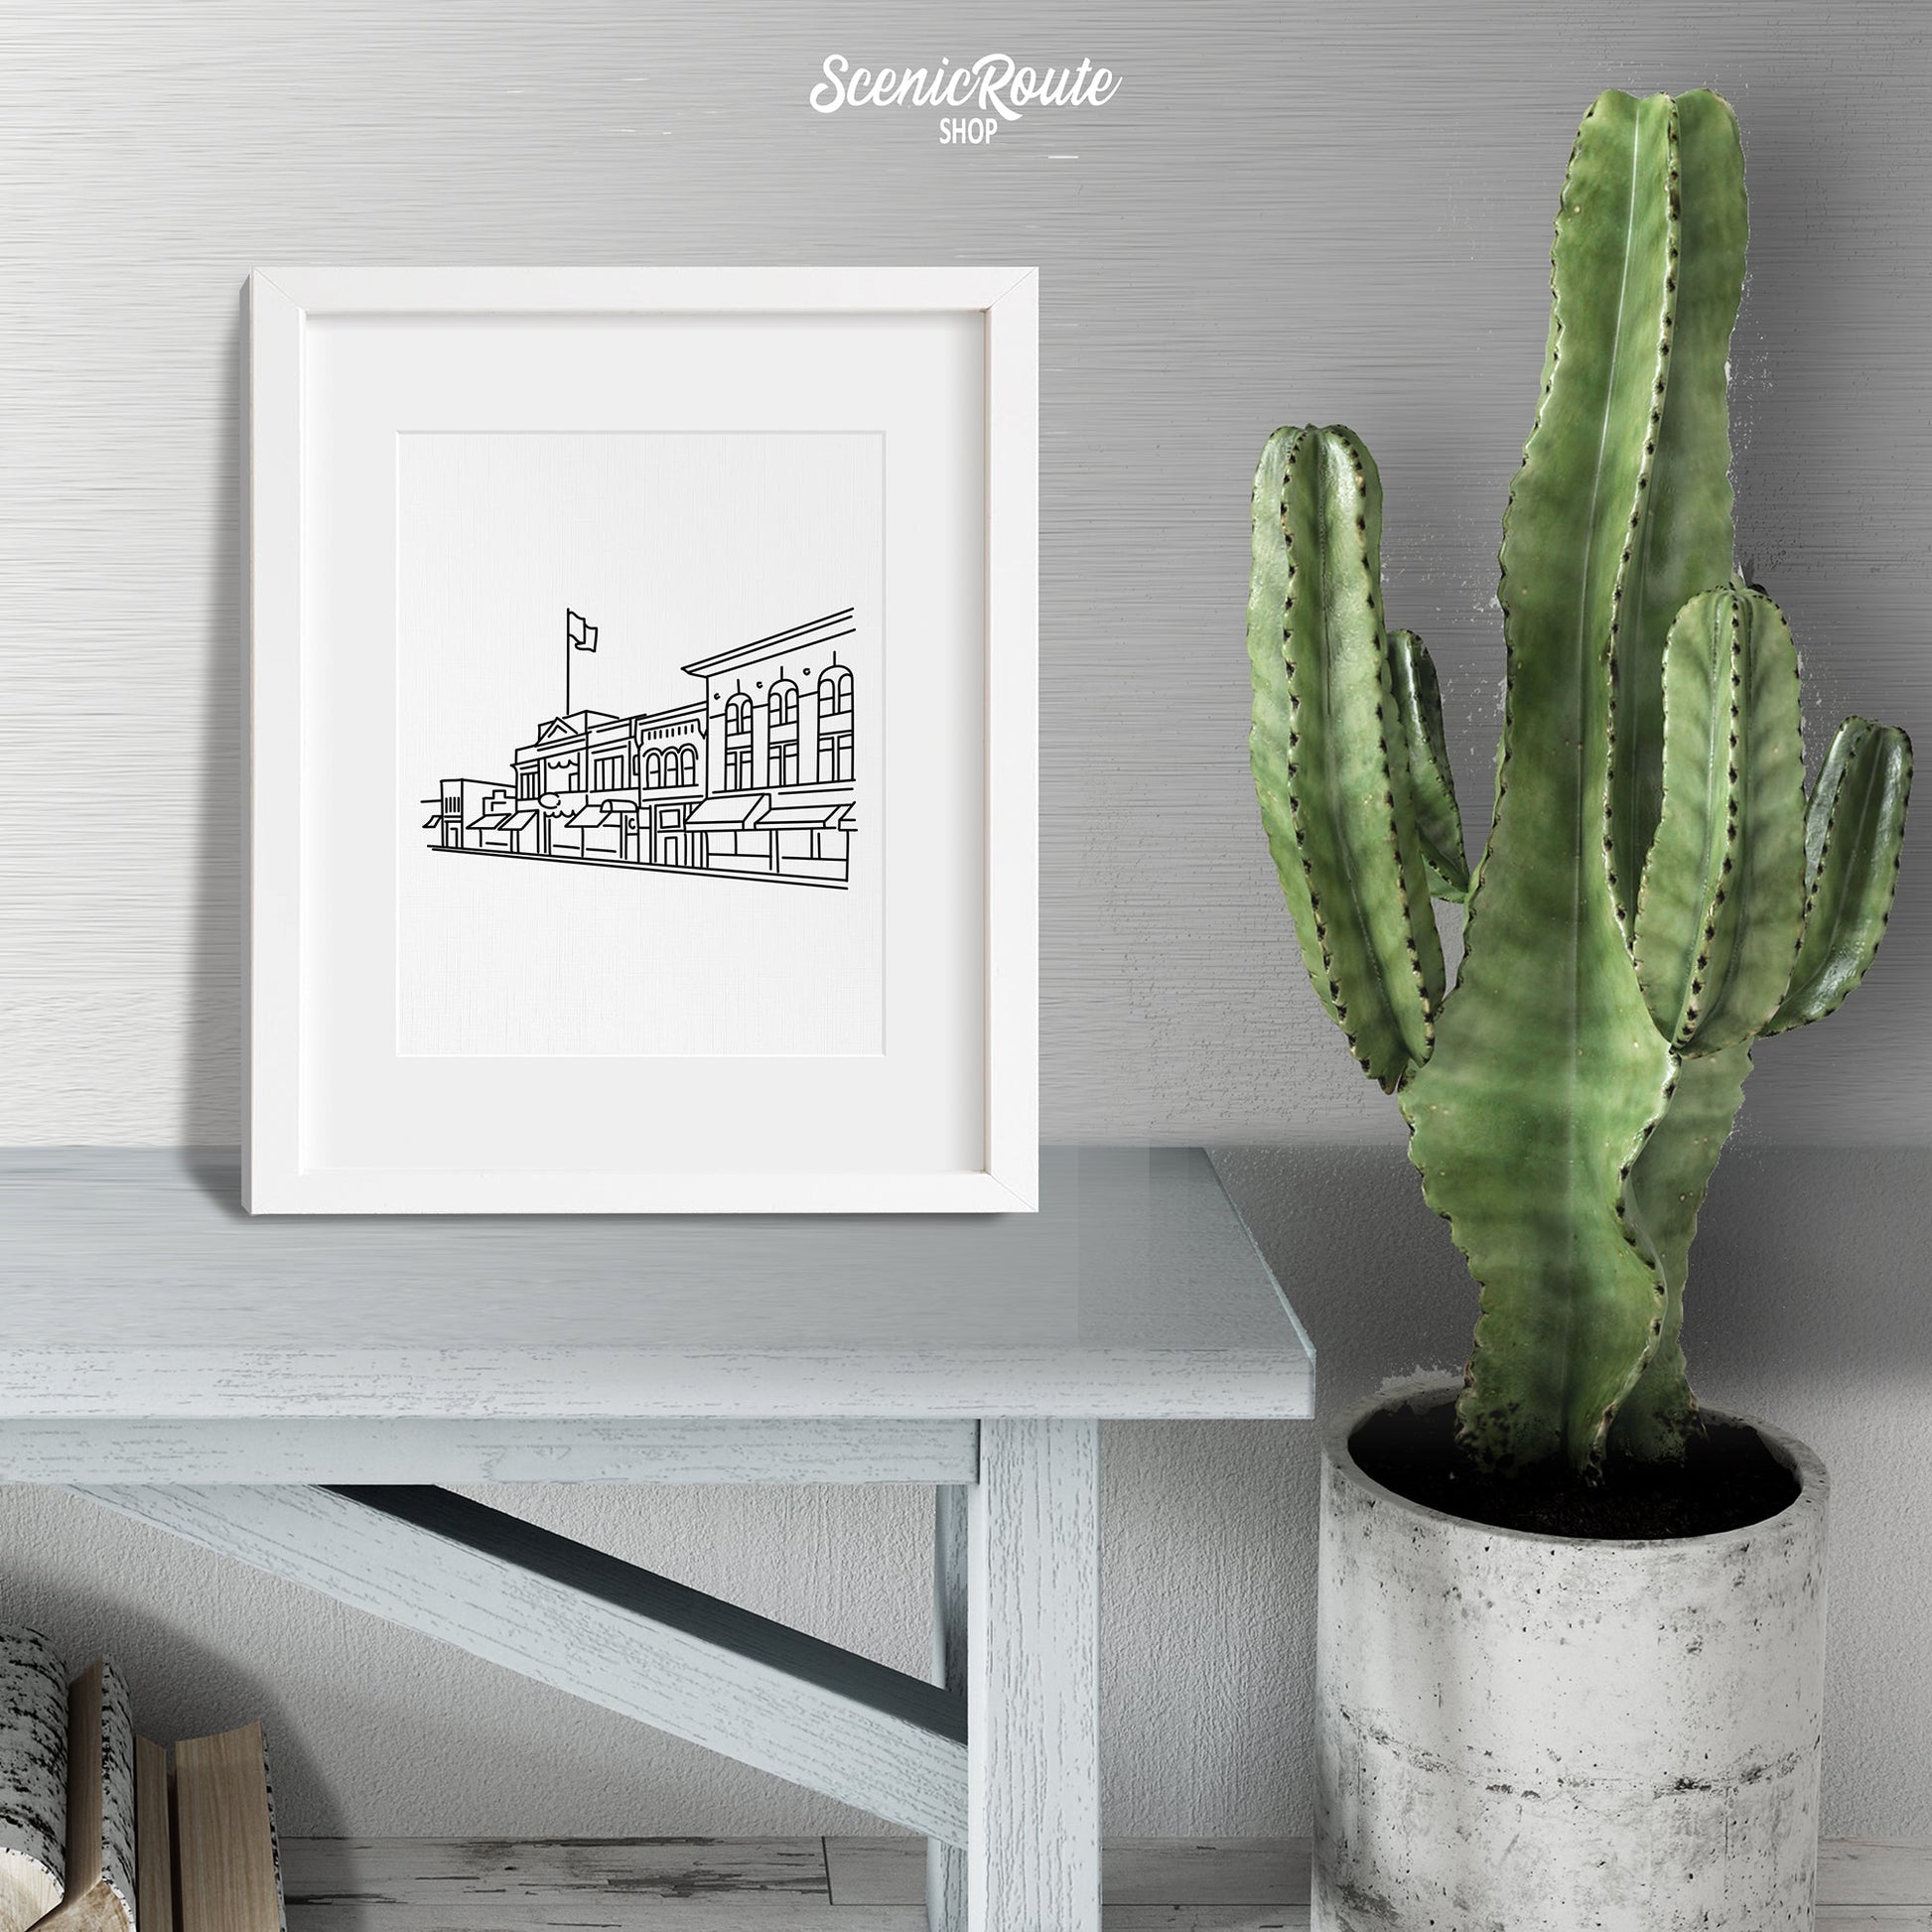 A framed line art drawing of the Prescott Skyline sitting on a wood bench next to a potted cactus